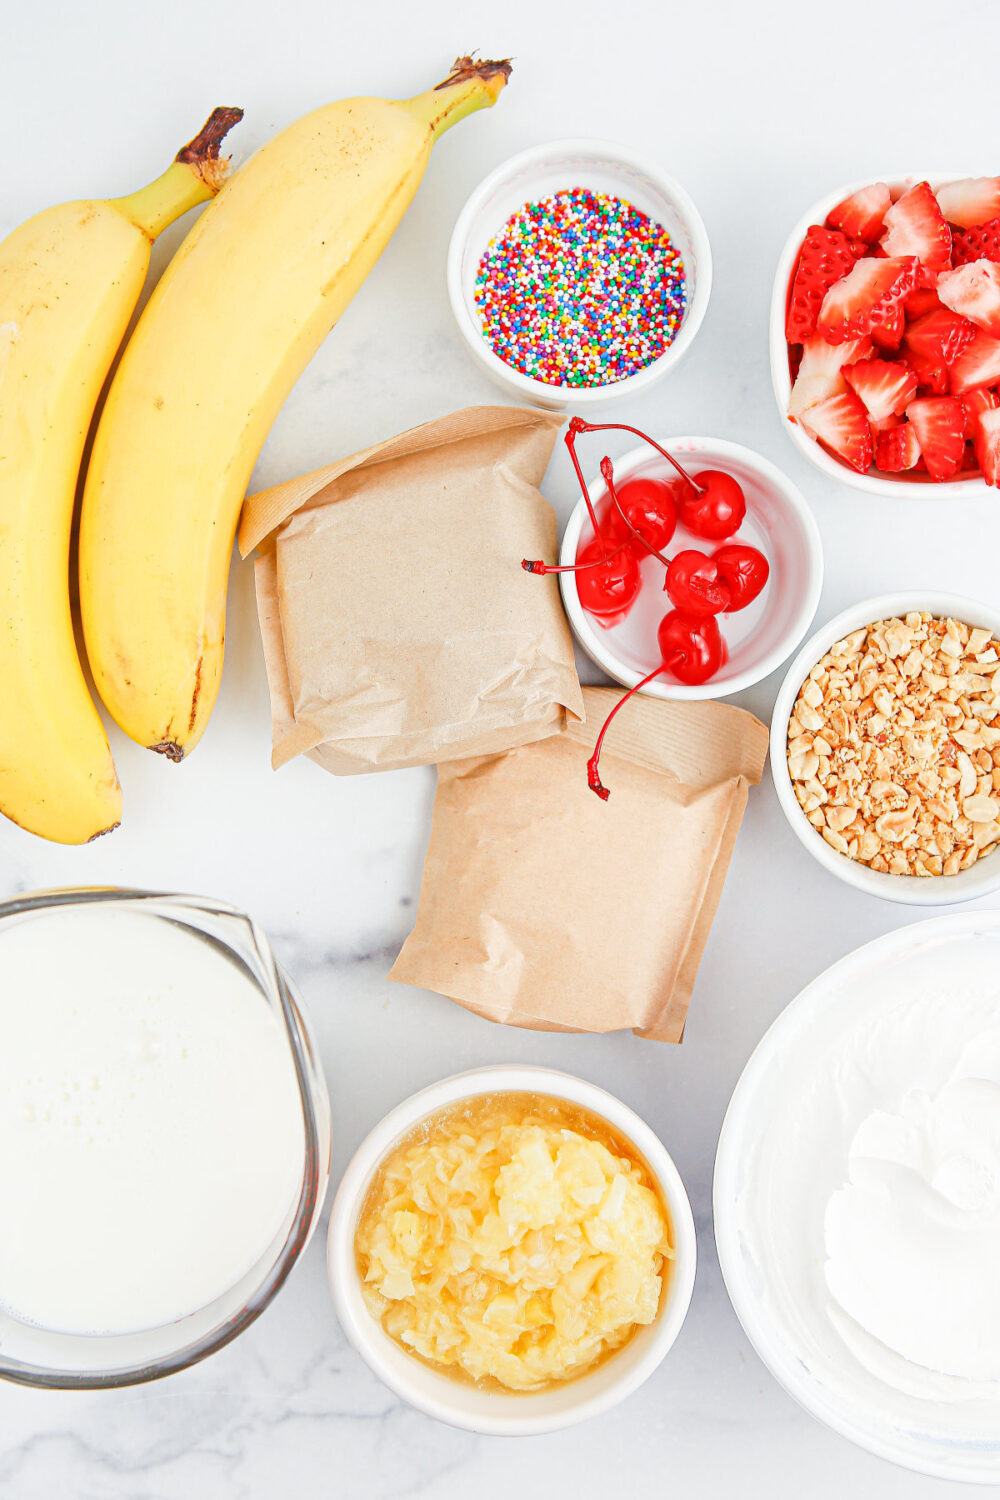 Bananas, sprinkles, cherries, pudding mixes, and other ingredients. 